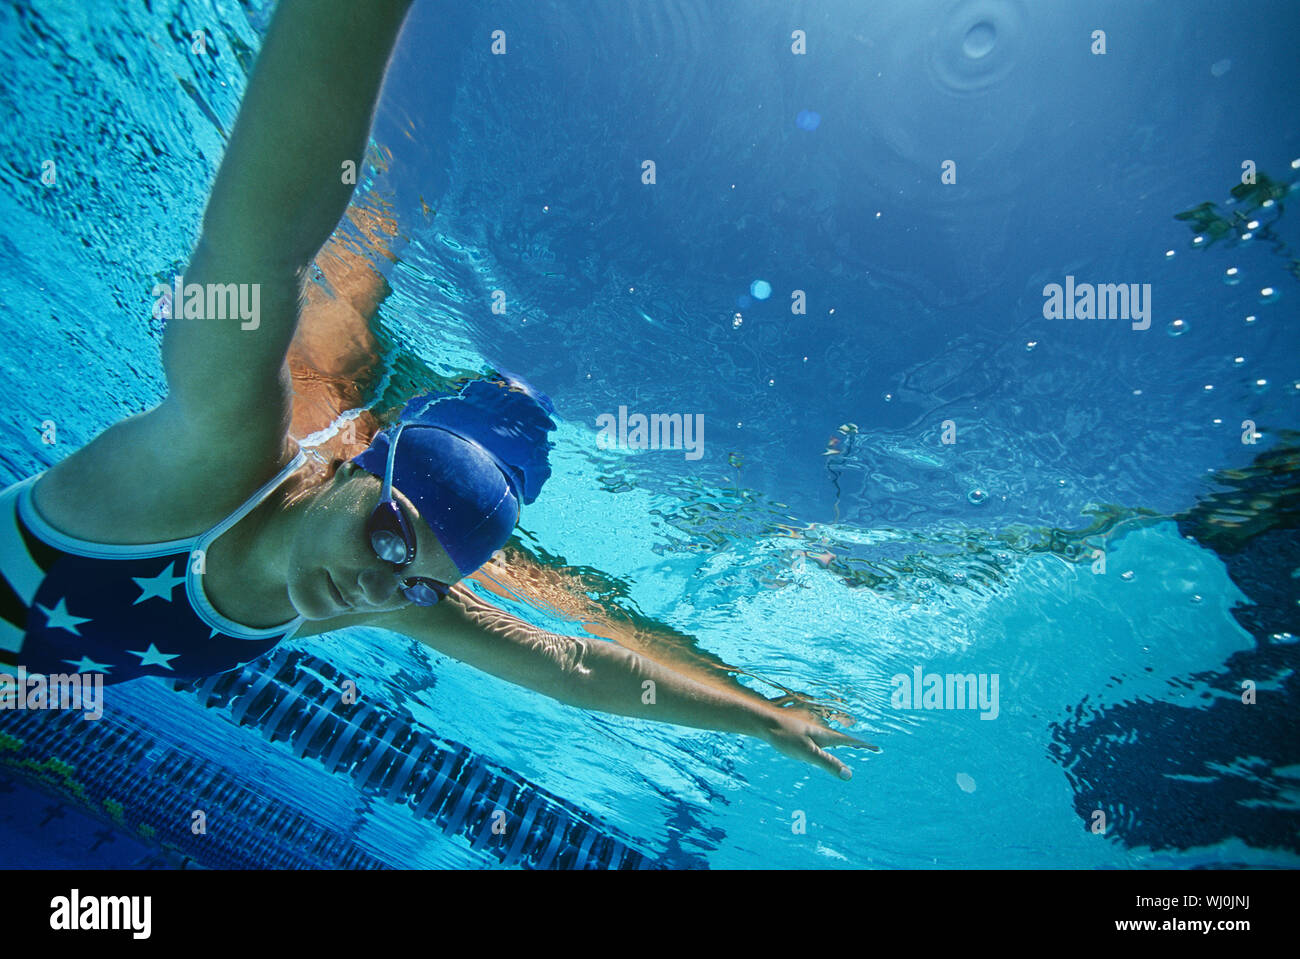 Female swimmer wearing United States swimsuit, swimming in pool Stock Photo